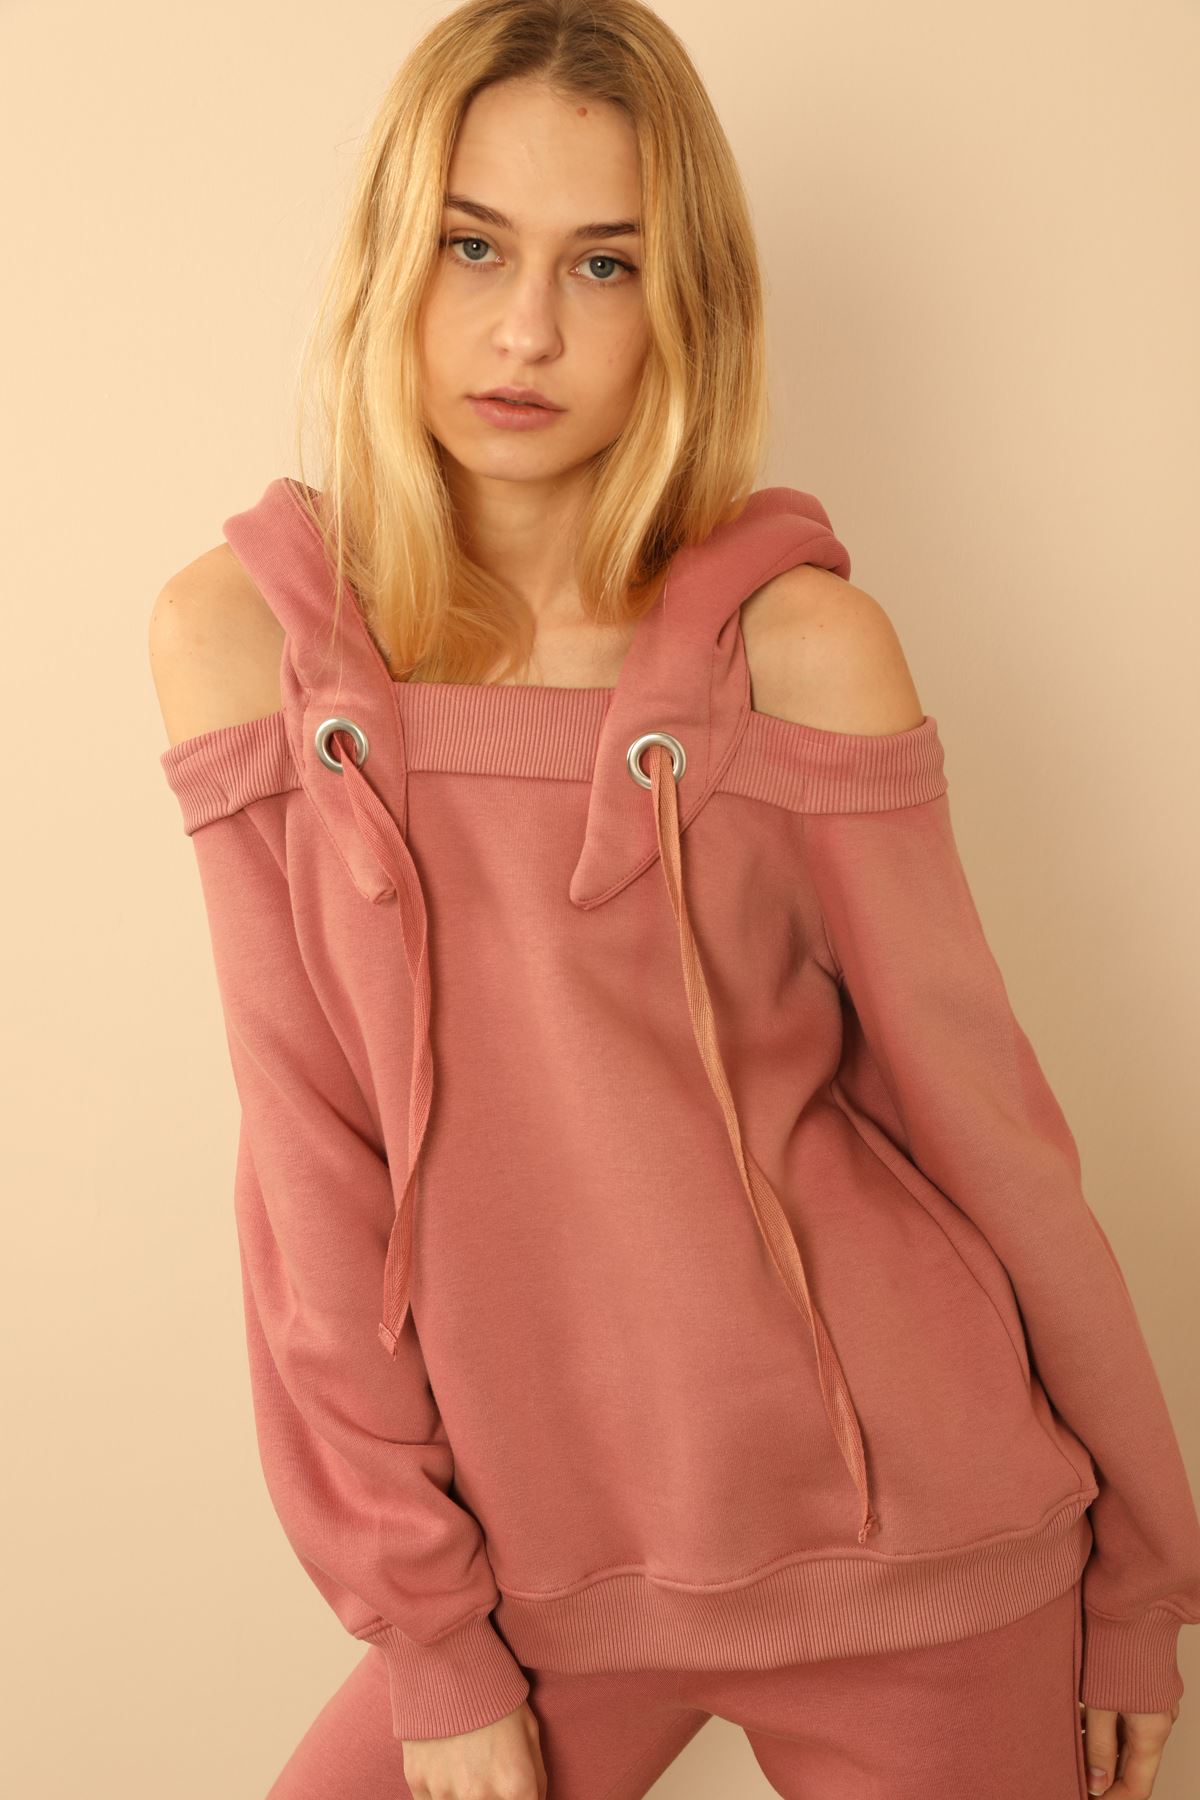 Third Knit With Wool İnside Fabric Hooded Hip Height Shoulder Detailed Women Sweatshirt - Rose 